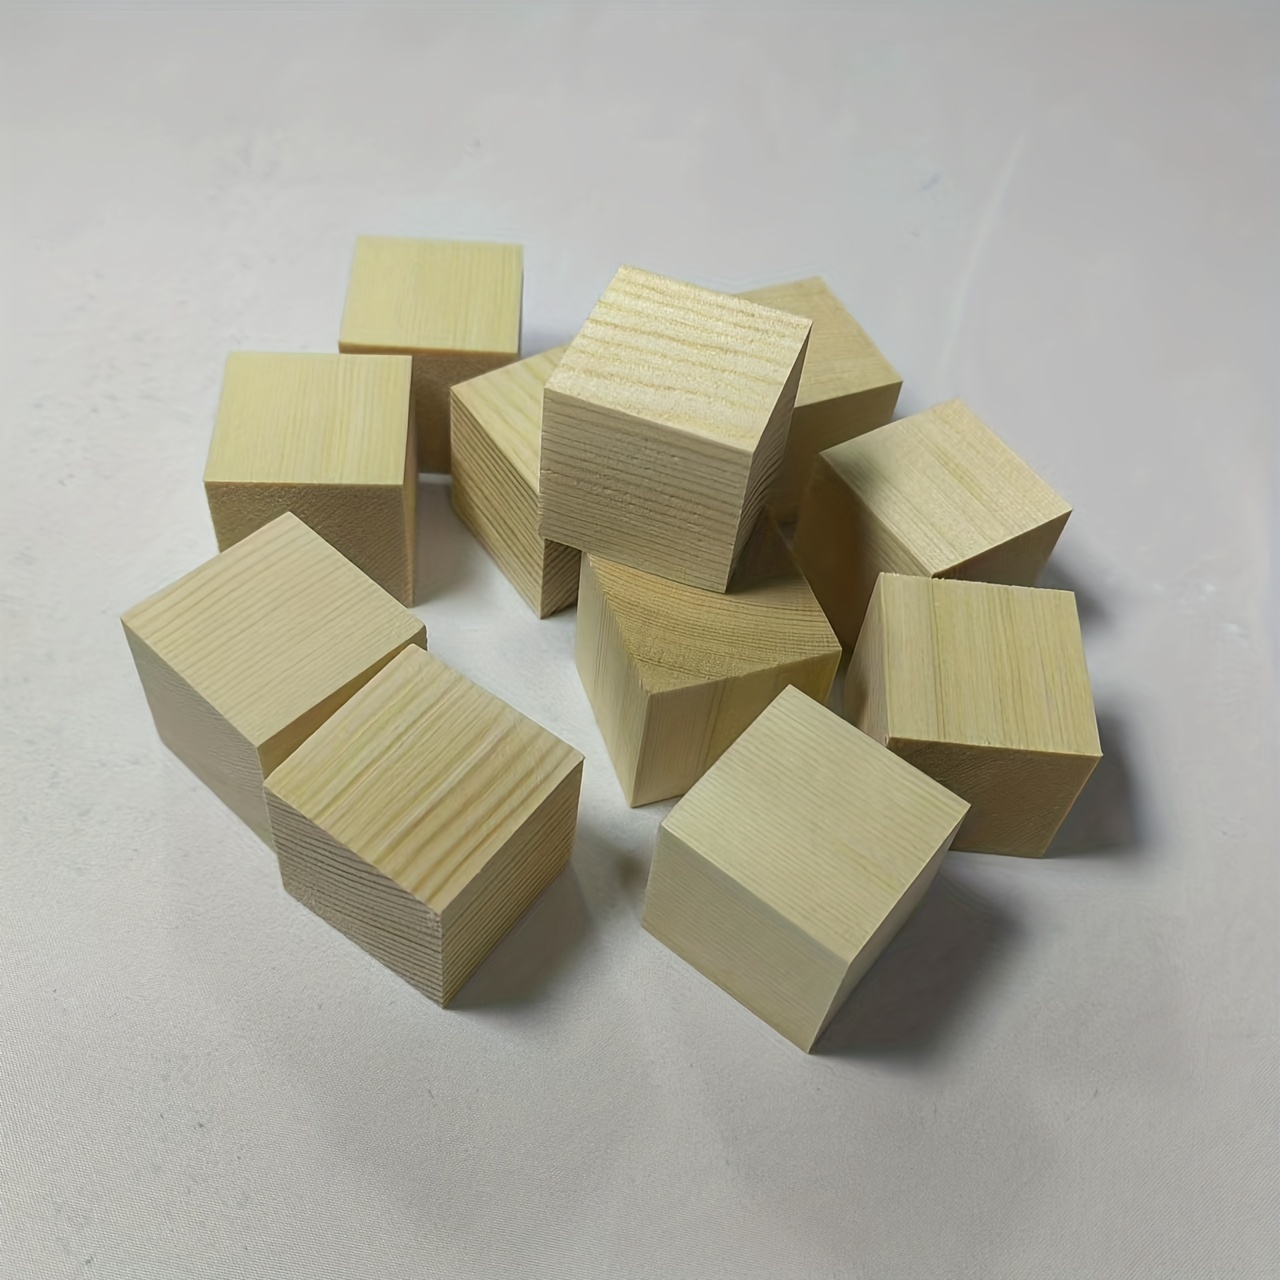 Wooden Blocks for Crafts, Unfinished Wood Cubes, 1.5 Inch Natural Wooden  Blocks, Pack of 15 Wood Square Blocks, Wooden Cubes for Arts and Crafts and